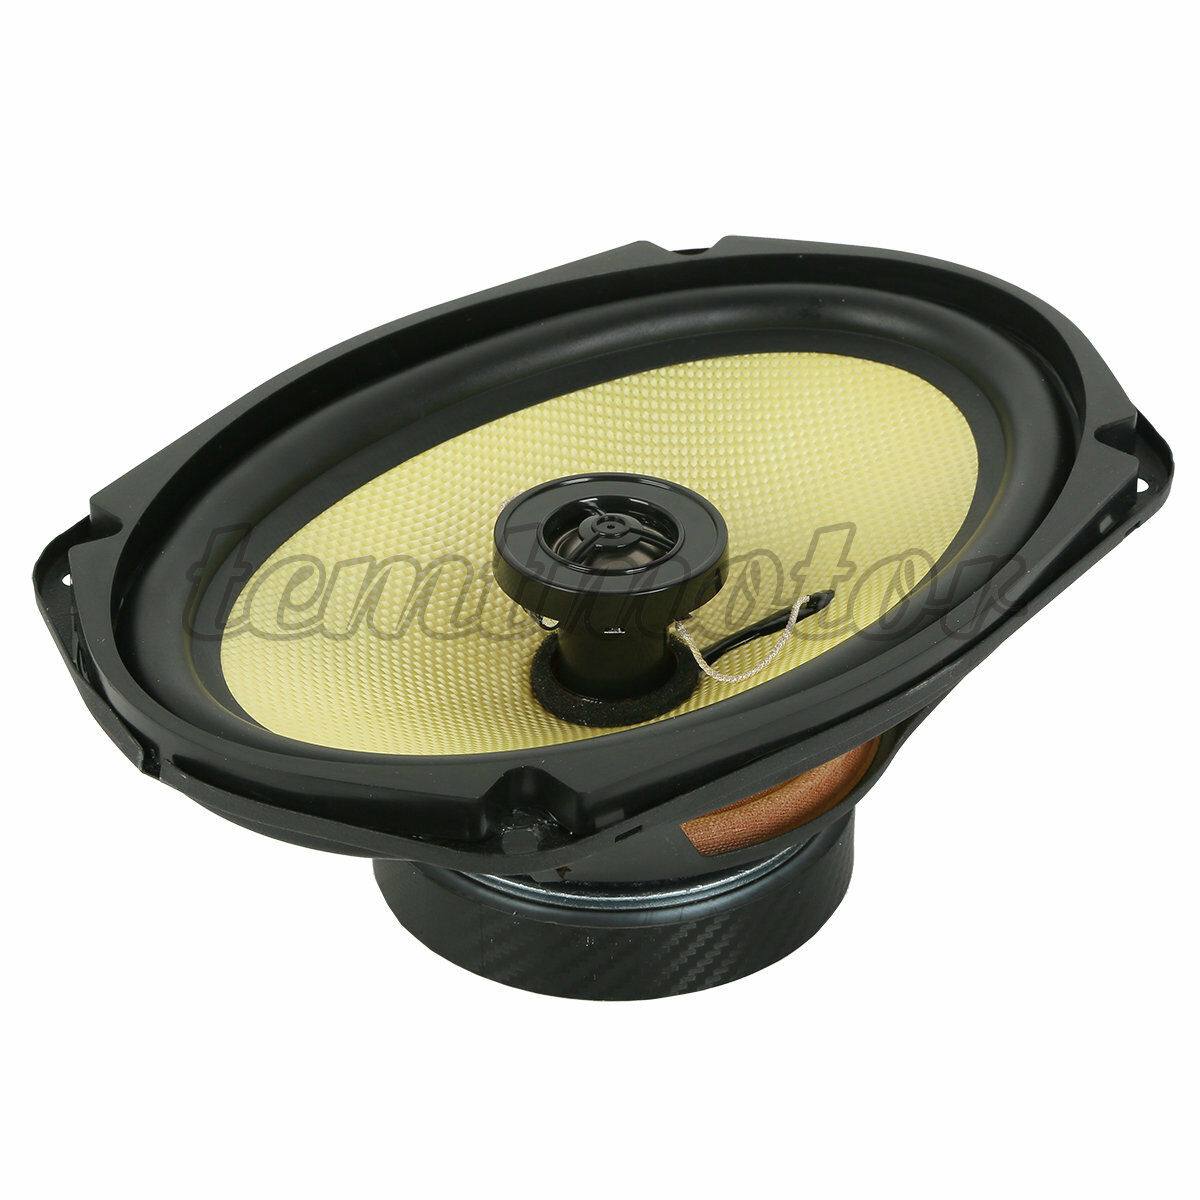 Saddlebag Lid 6"x9" Speakers Fit For Harley Touring Electra Street Glide 94-22 - Moto Life Products